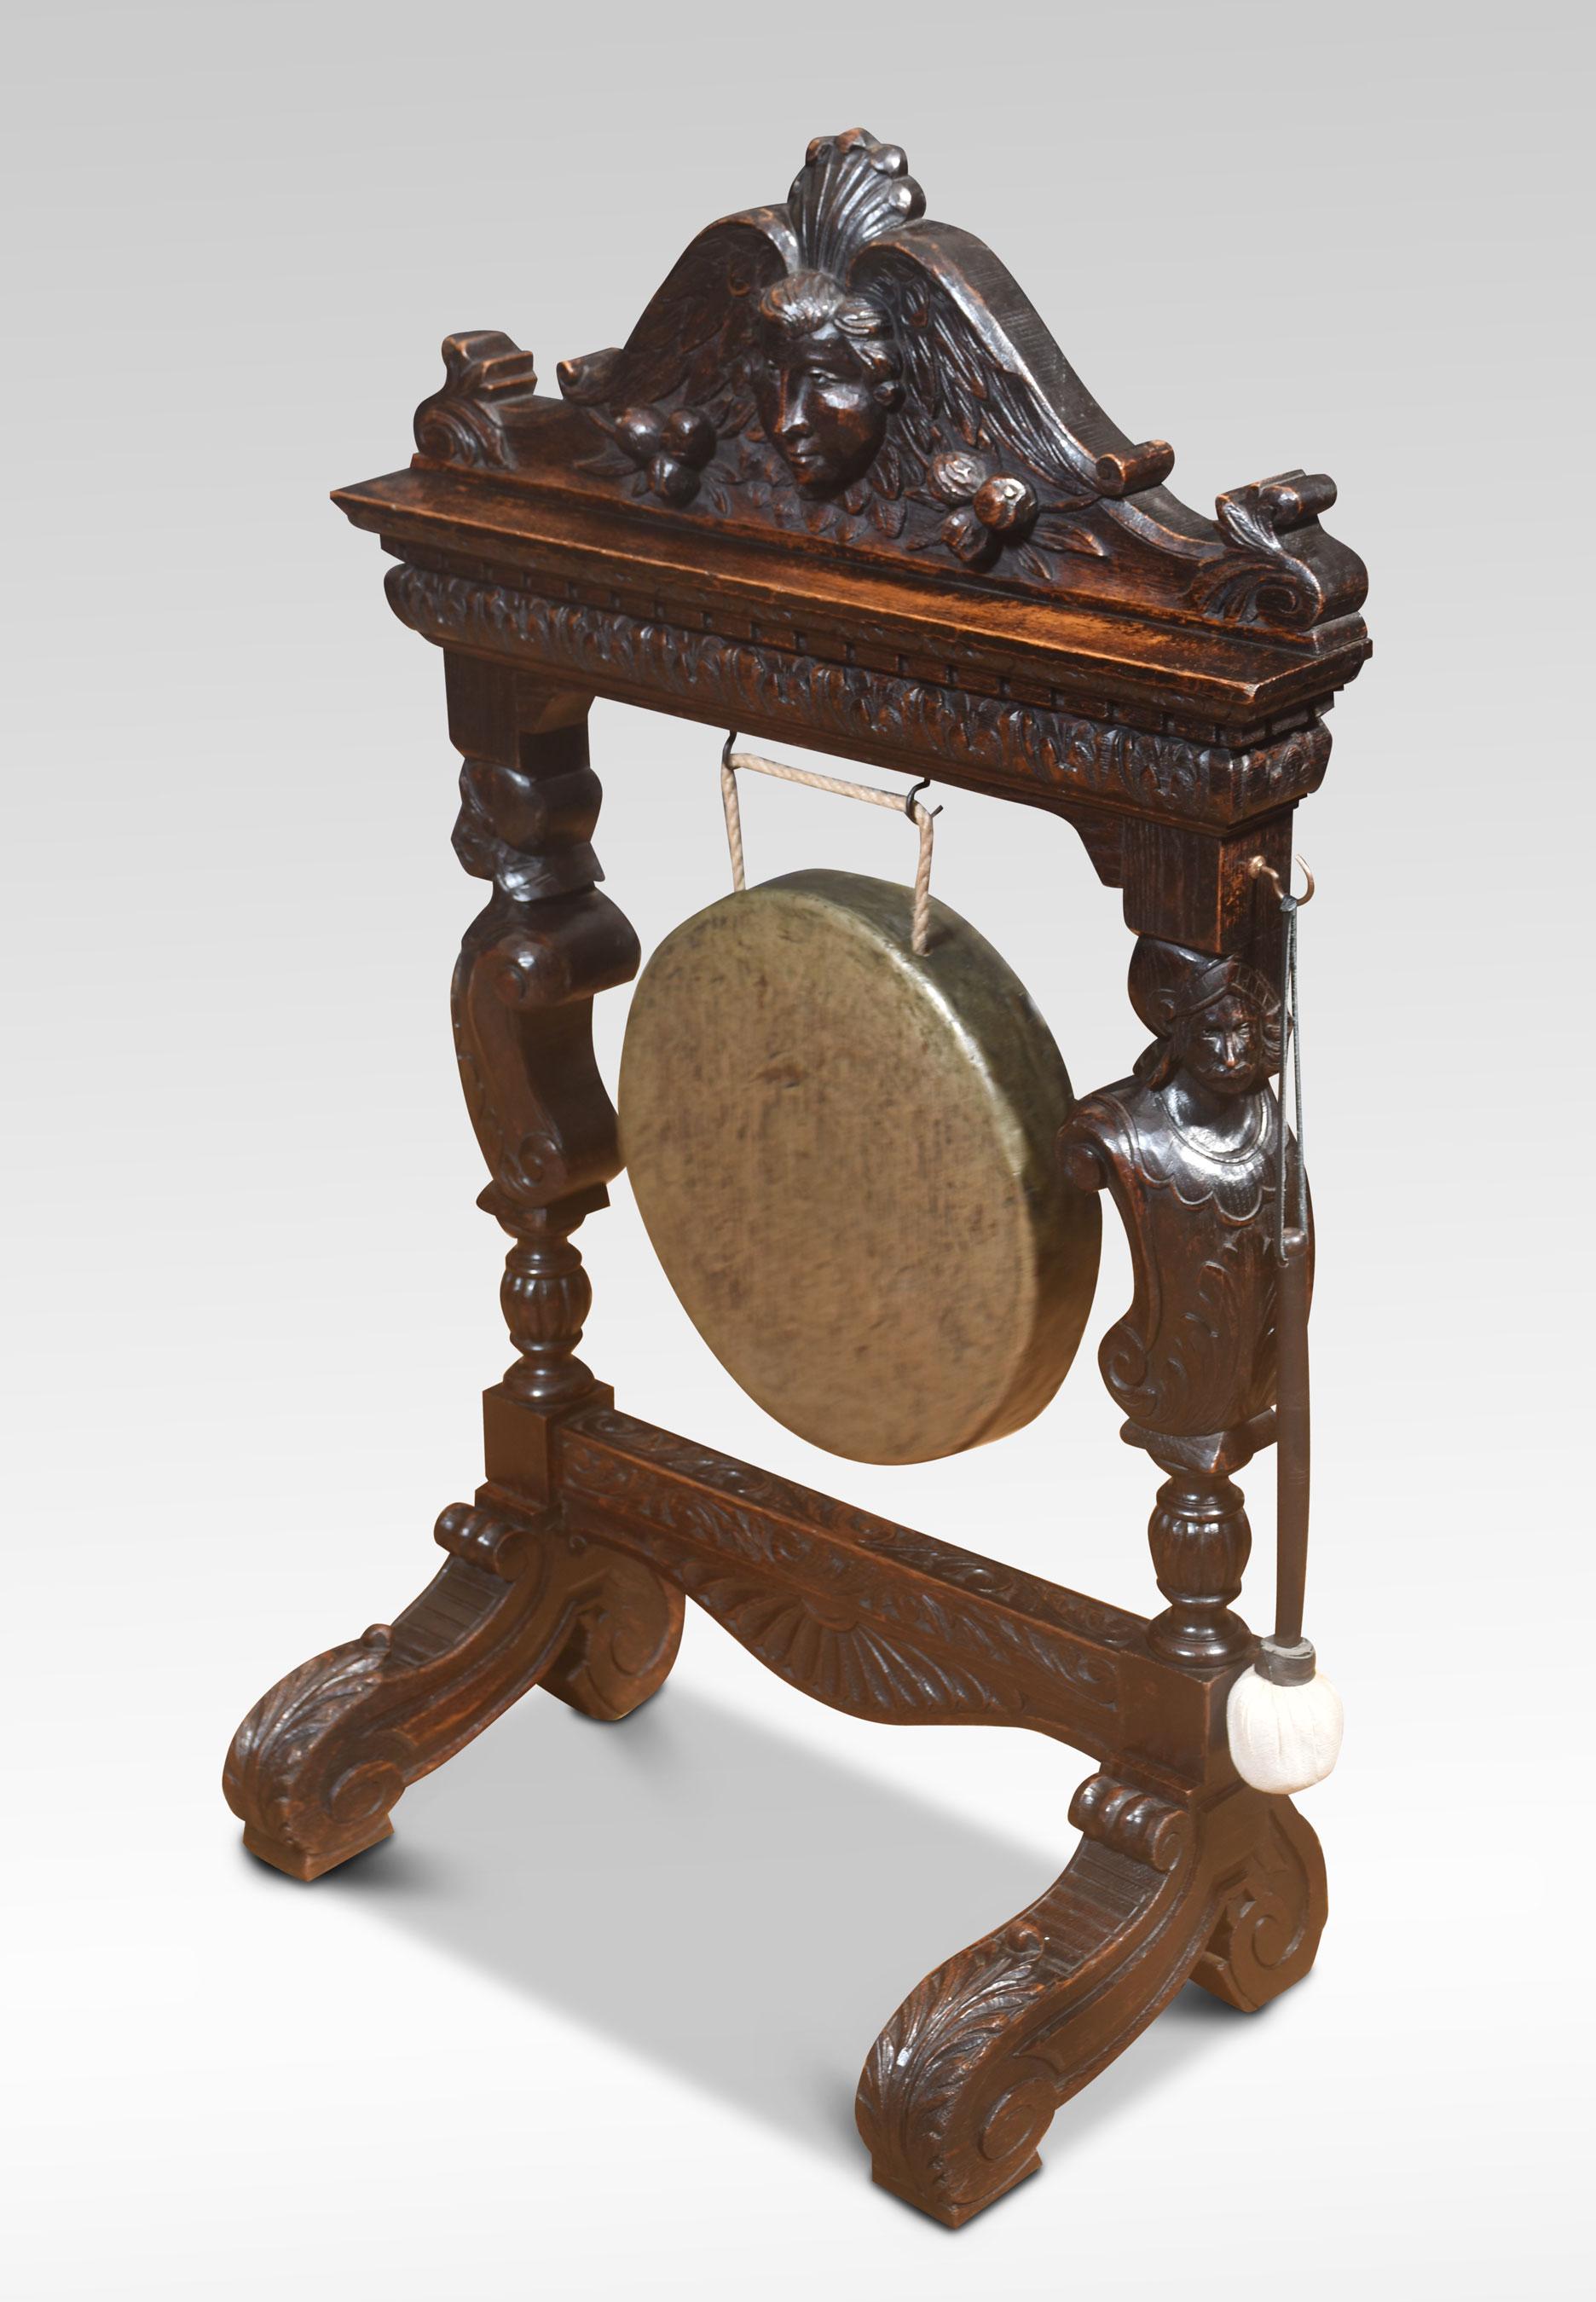 Carved oak dinner gong, the oak frame with mask pediment above a leaf-carved scroll decorated frame supporting the original brass gong. All raised on scrolling legs.
Dimensions
Height 42.5 Inches
Width 27.5 Inches
Depth 15 Inches